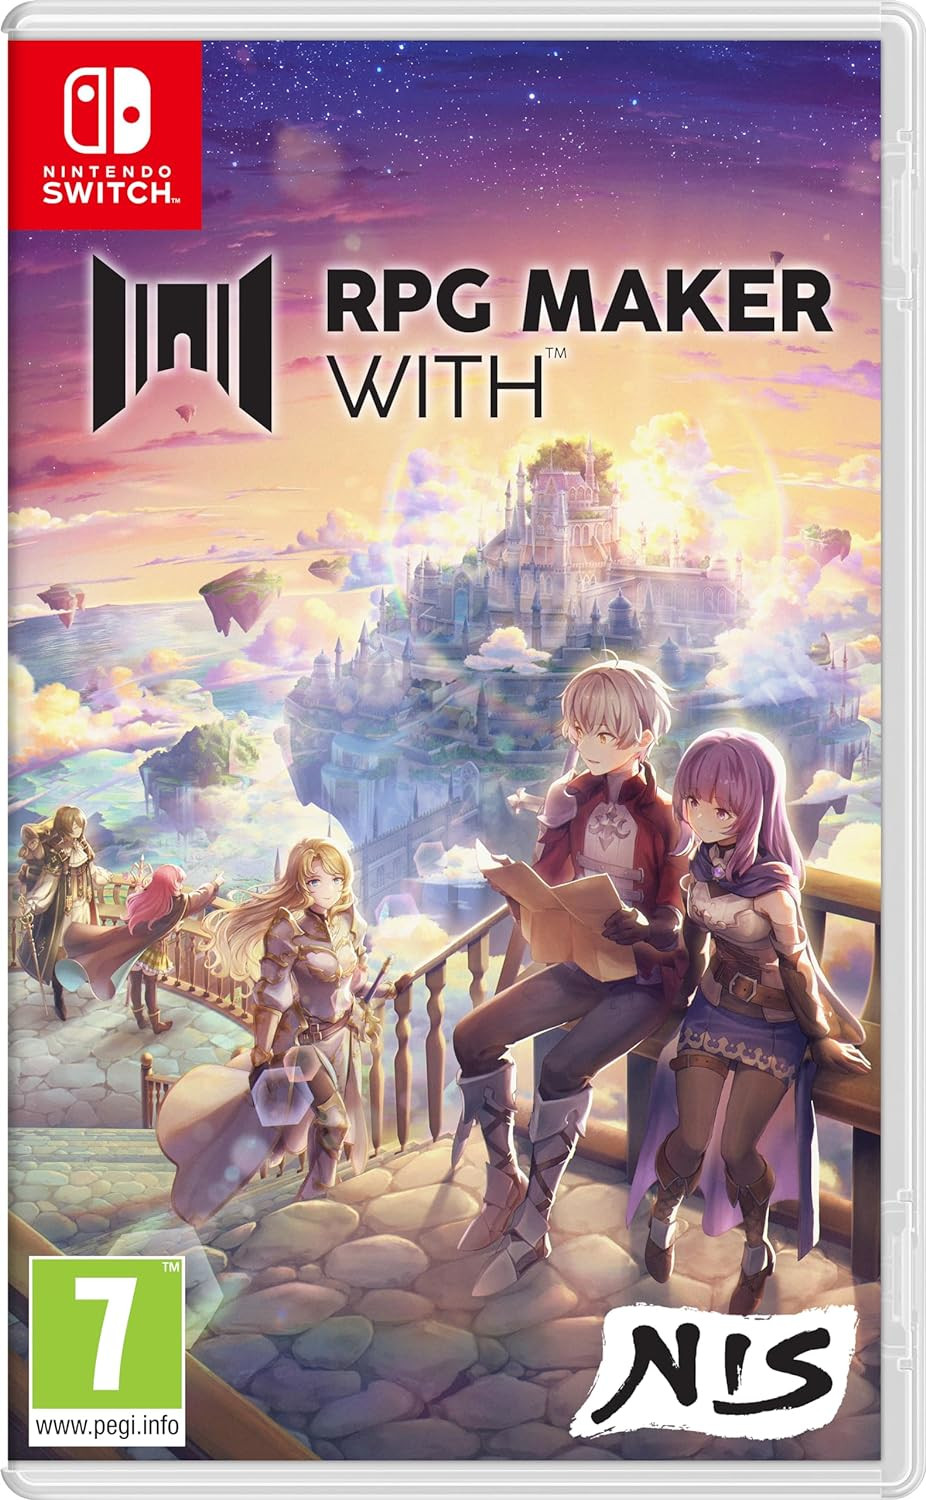 RPG Maker With - Nintendo Switch